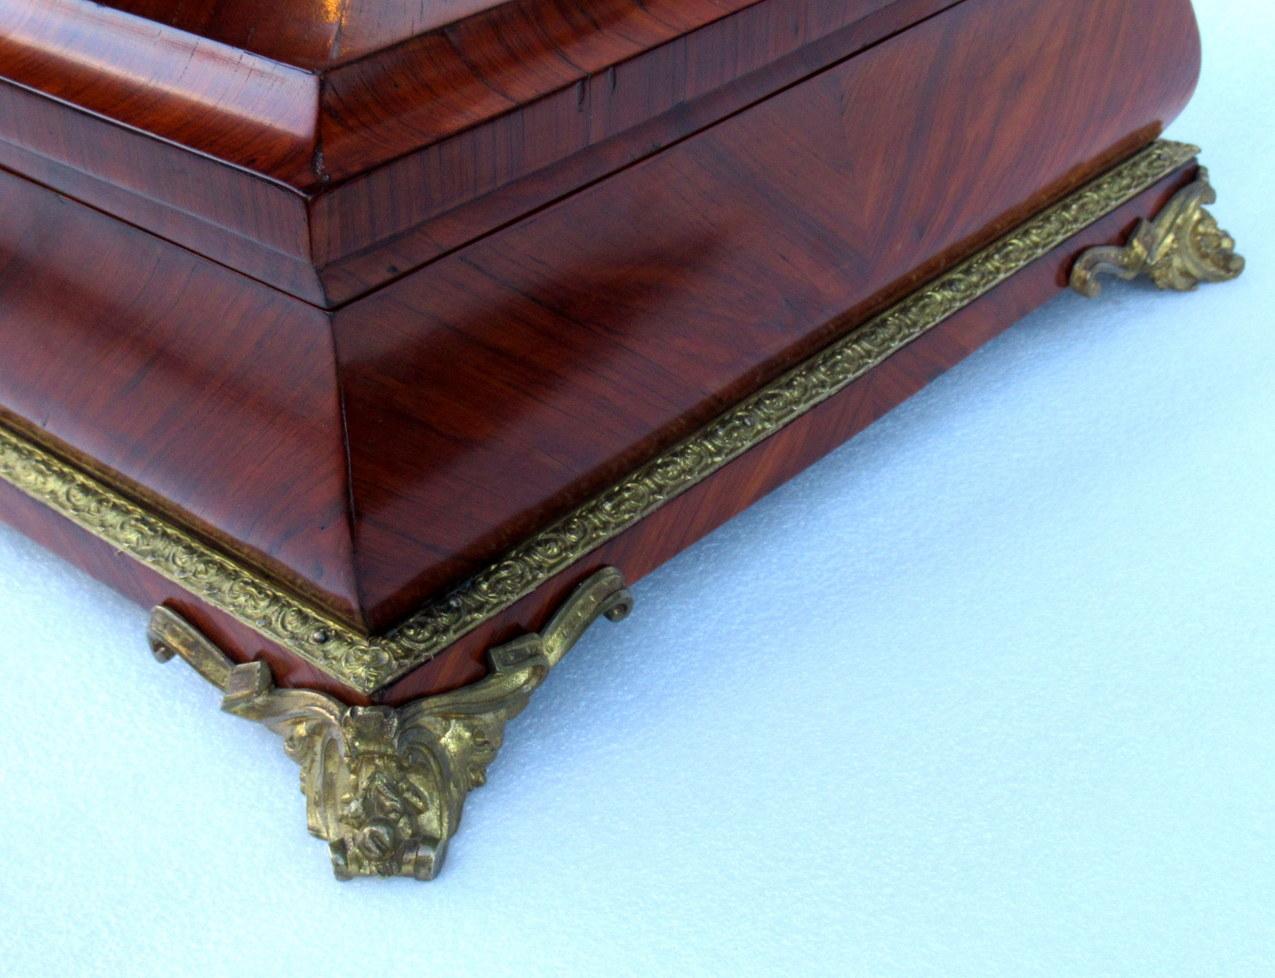 Plated Antique French Kingwood Bird's-Eye Maple Jewelry Casket Box Tahan Paris For Sale